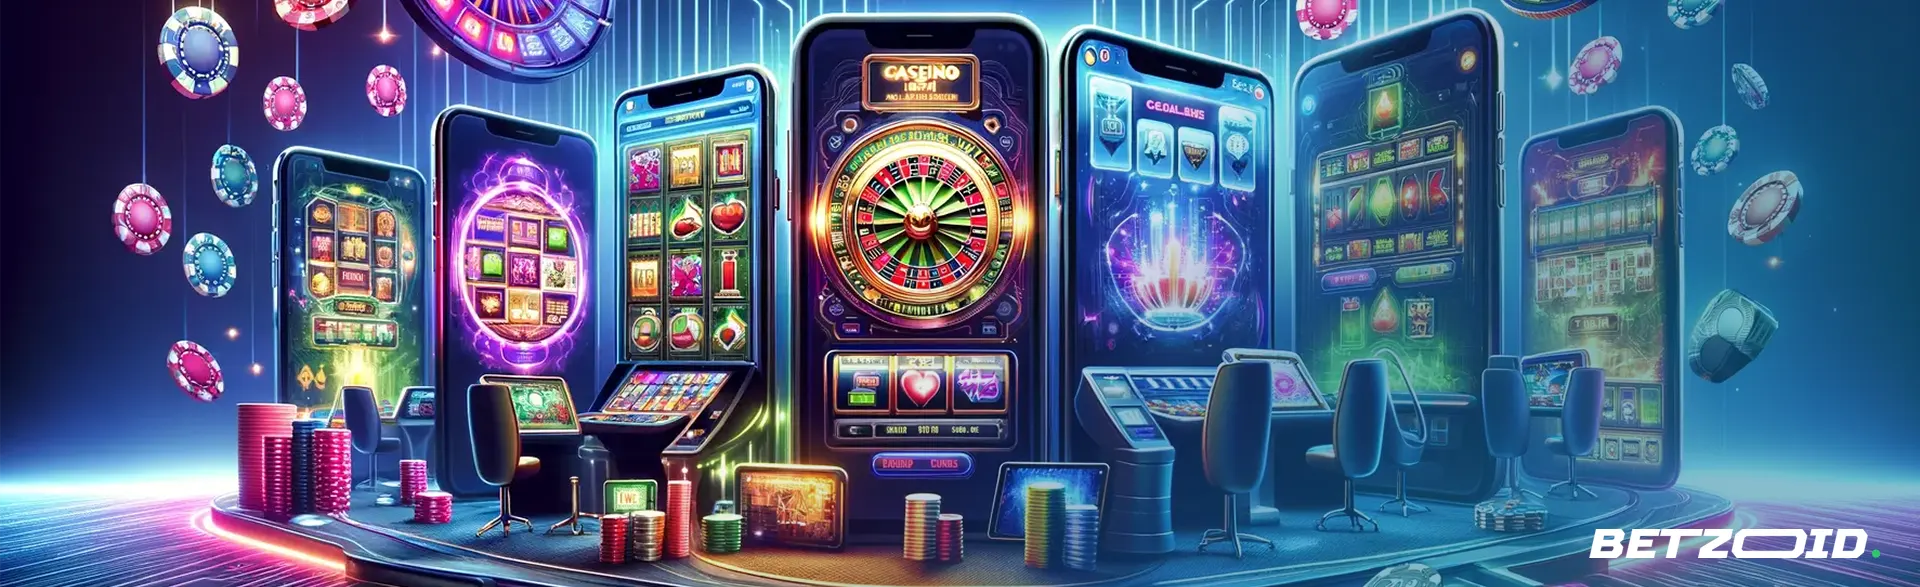 Mobile quick payout online casinos.